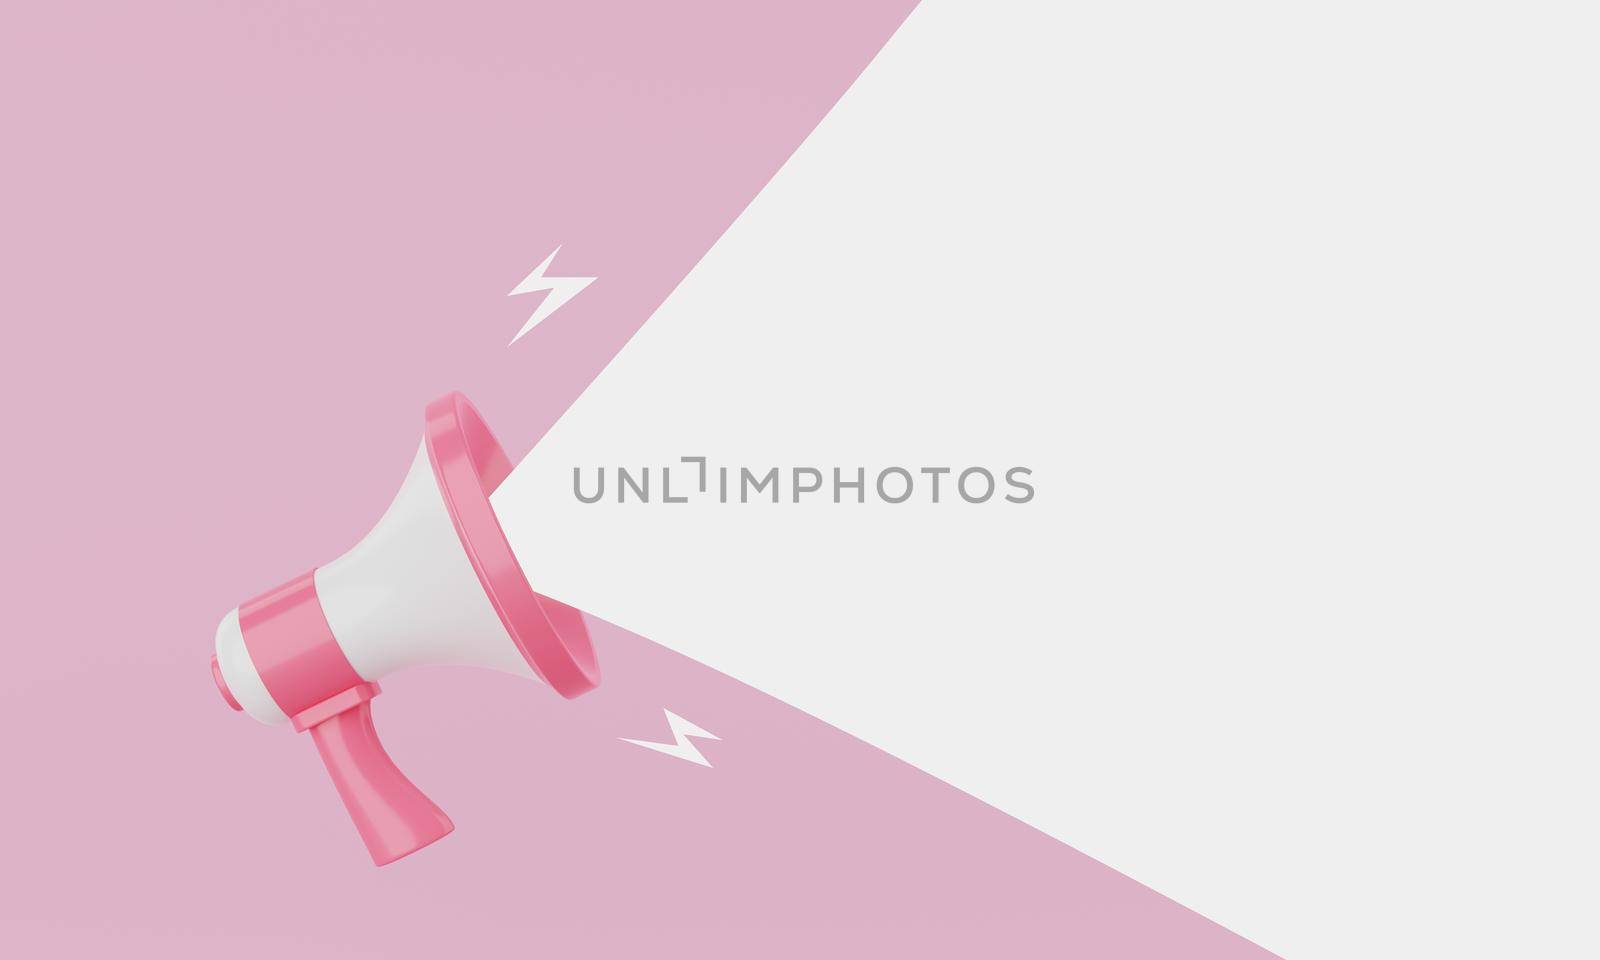 Pink pastel and white megaphone announcing white empty blank space message balloon on blue background. Business and marketing concept. 3D illustration rendering